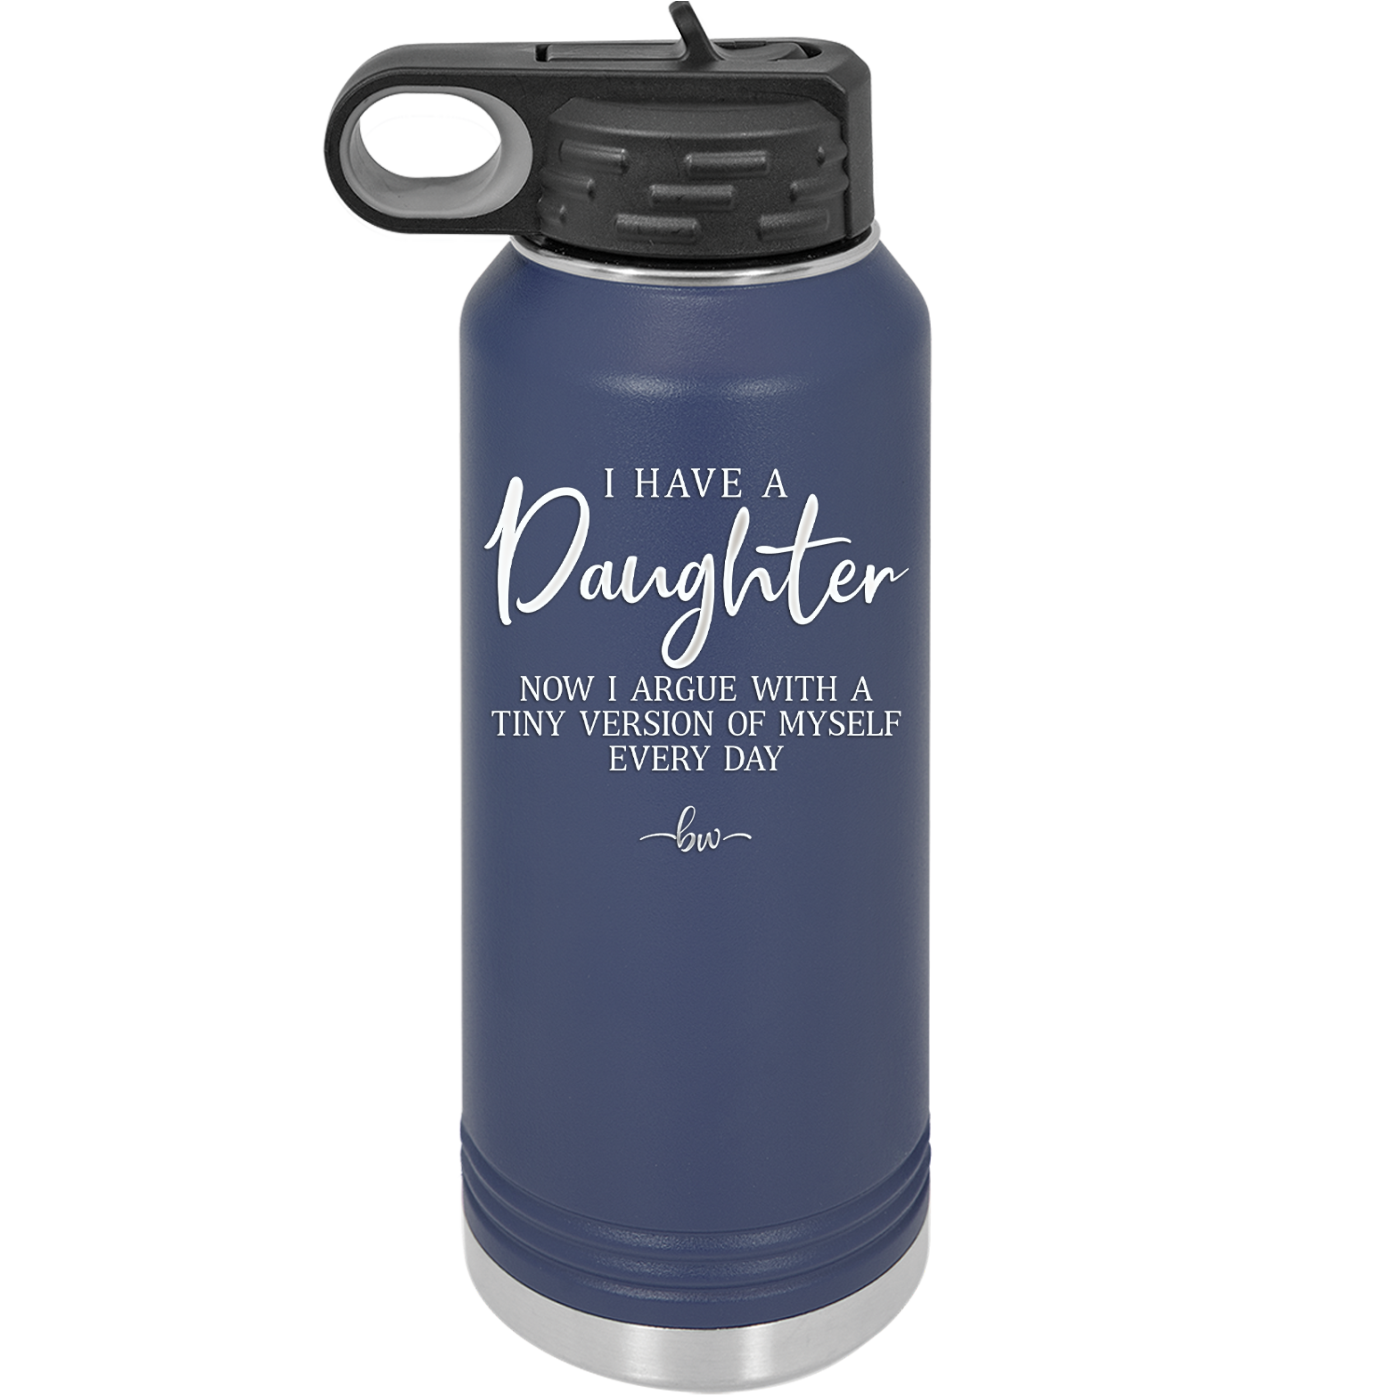 I Have a Daughter Now I Argue With a Tiny Version of Myself Every Day - Laser Engraved Stainless Steel Drinkware - 2330 -